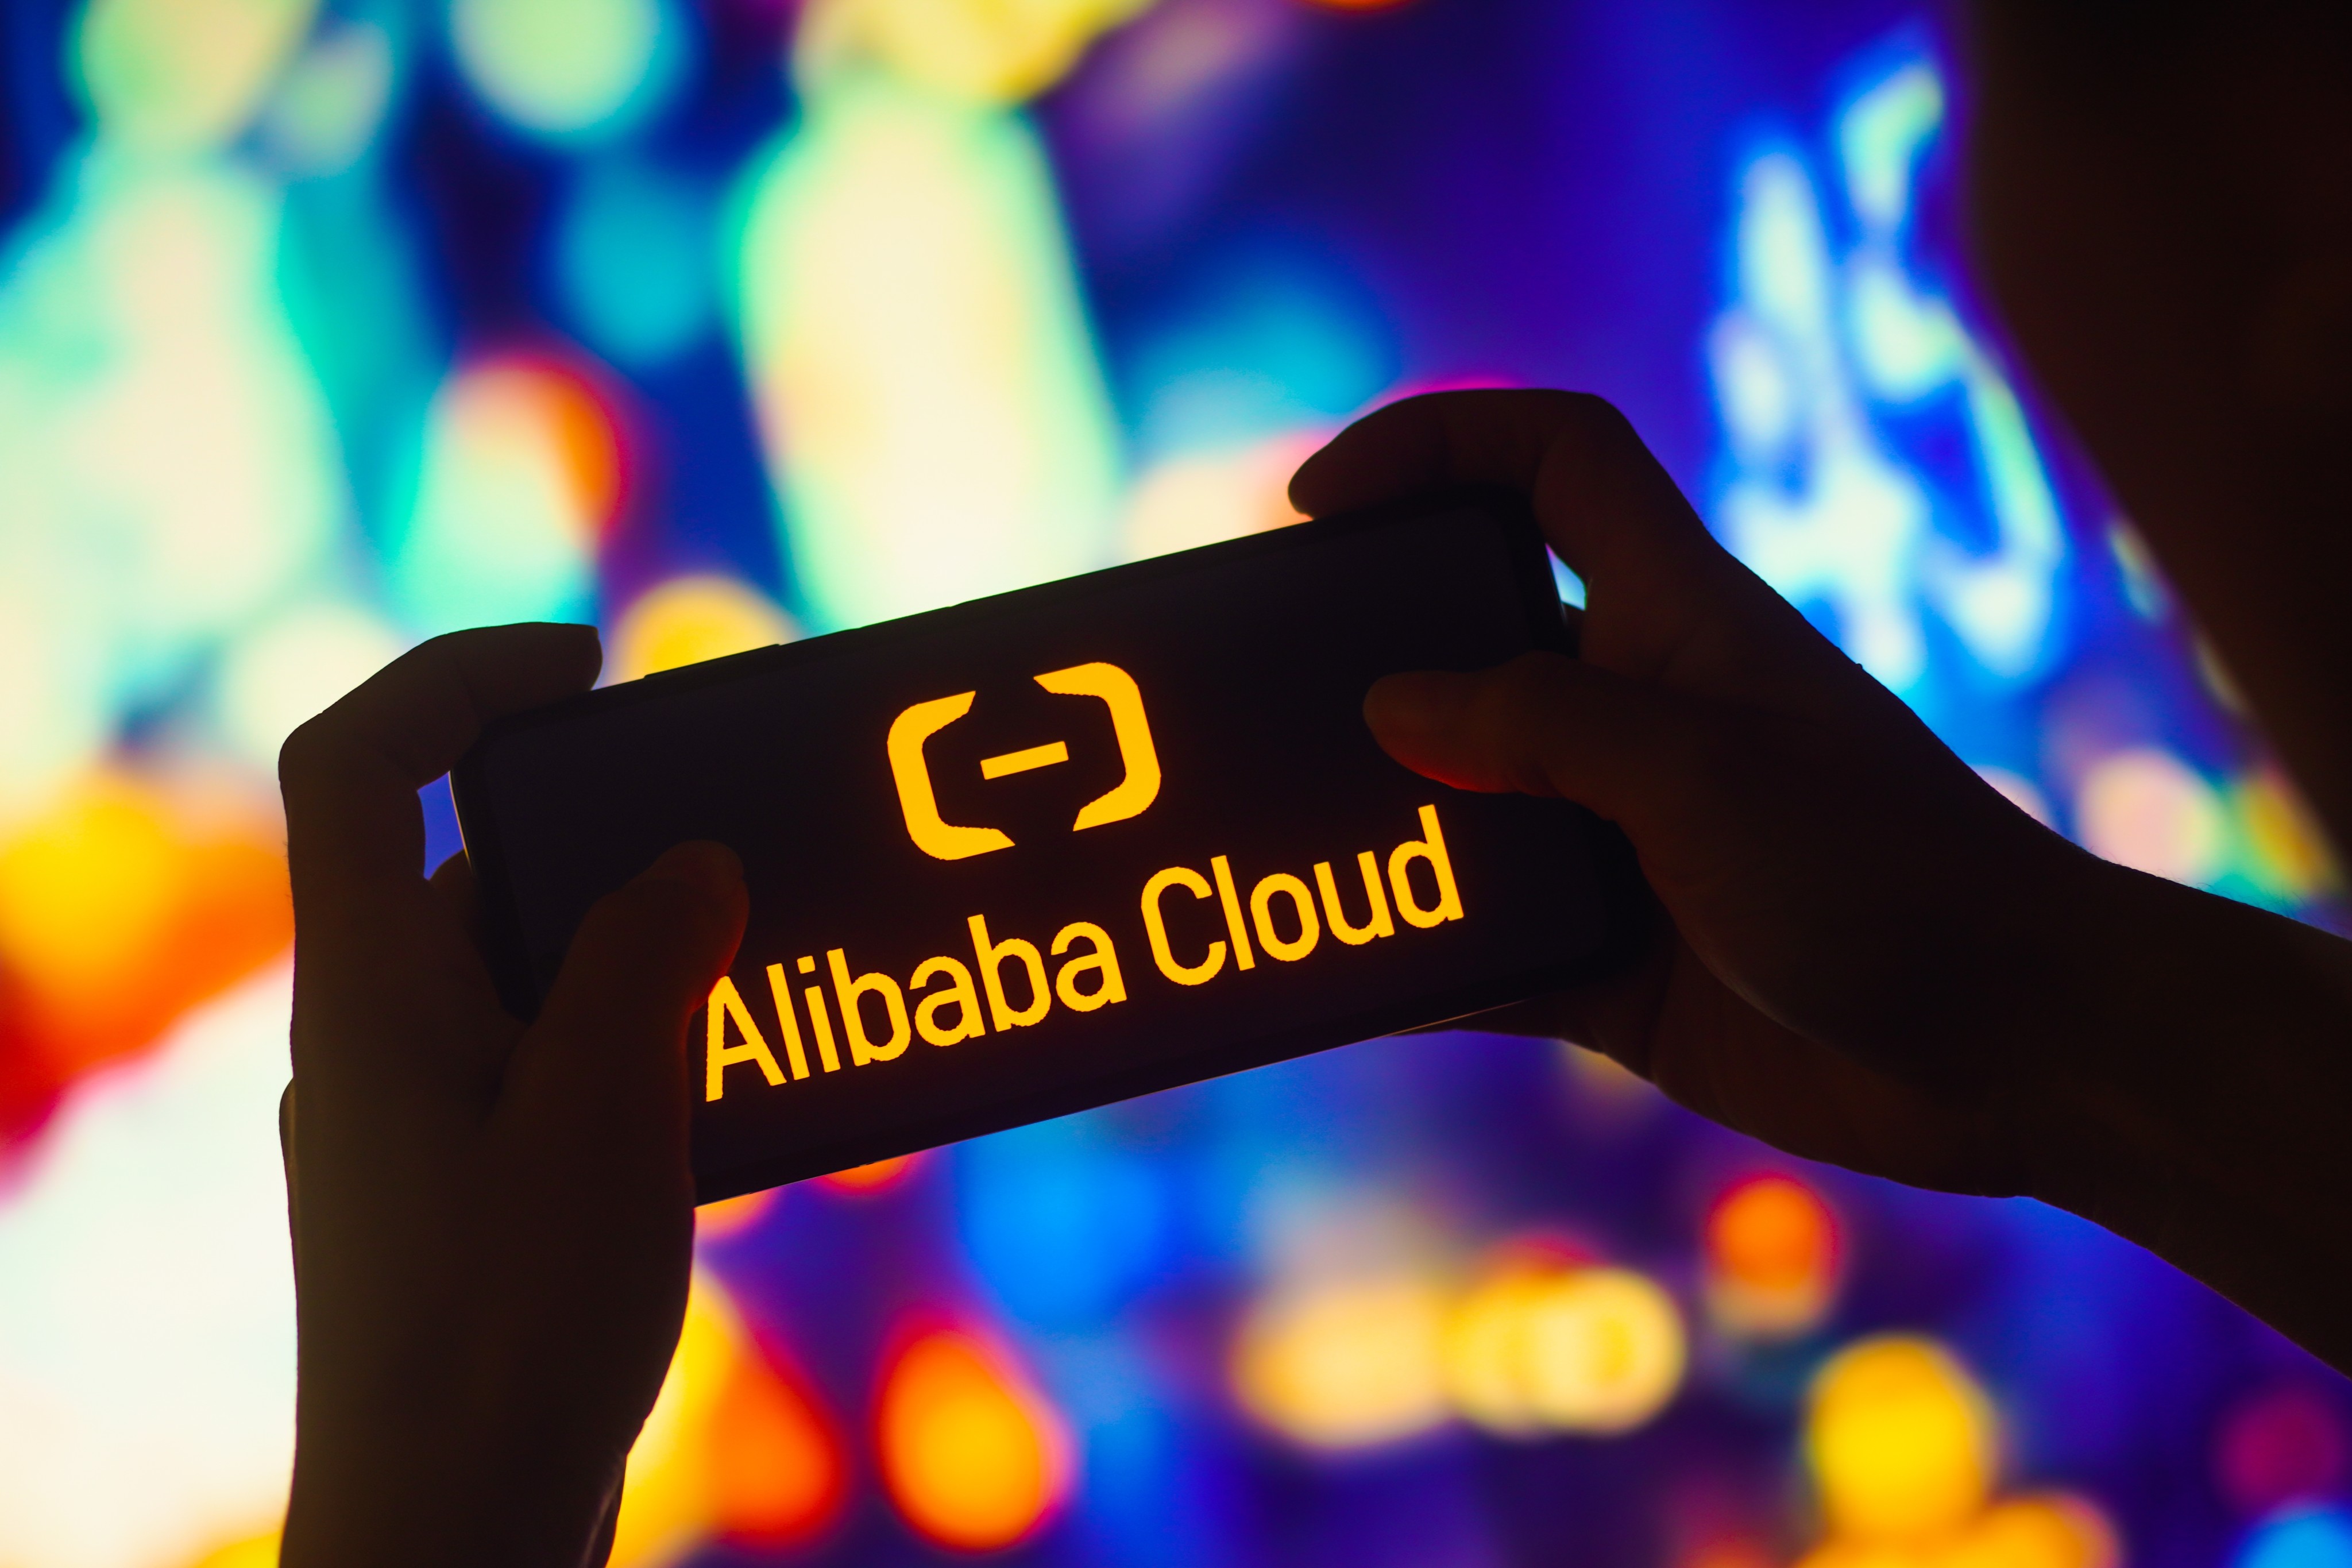 Alibaba Cloud is pressing ahead with overseas expansion. Photo: Shutterstock 